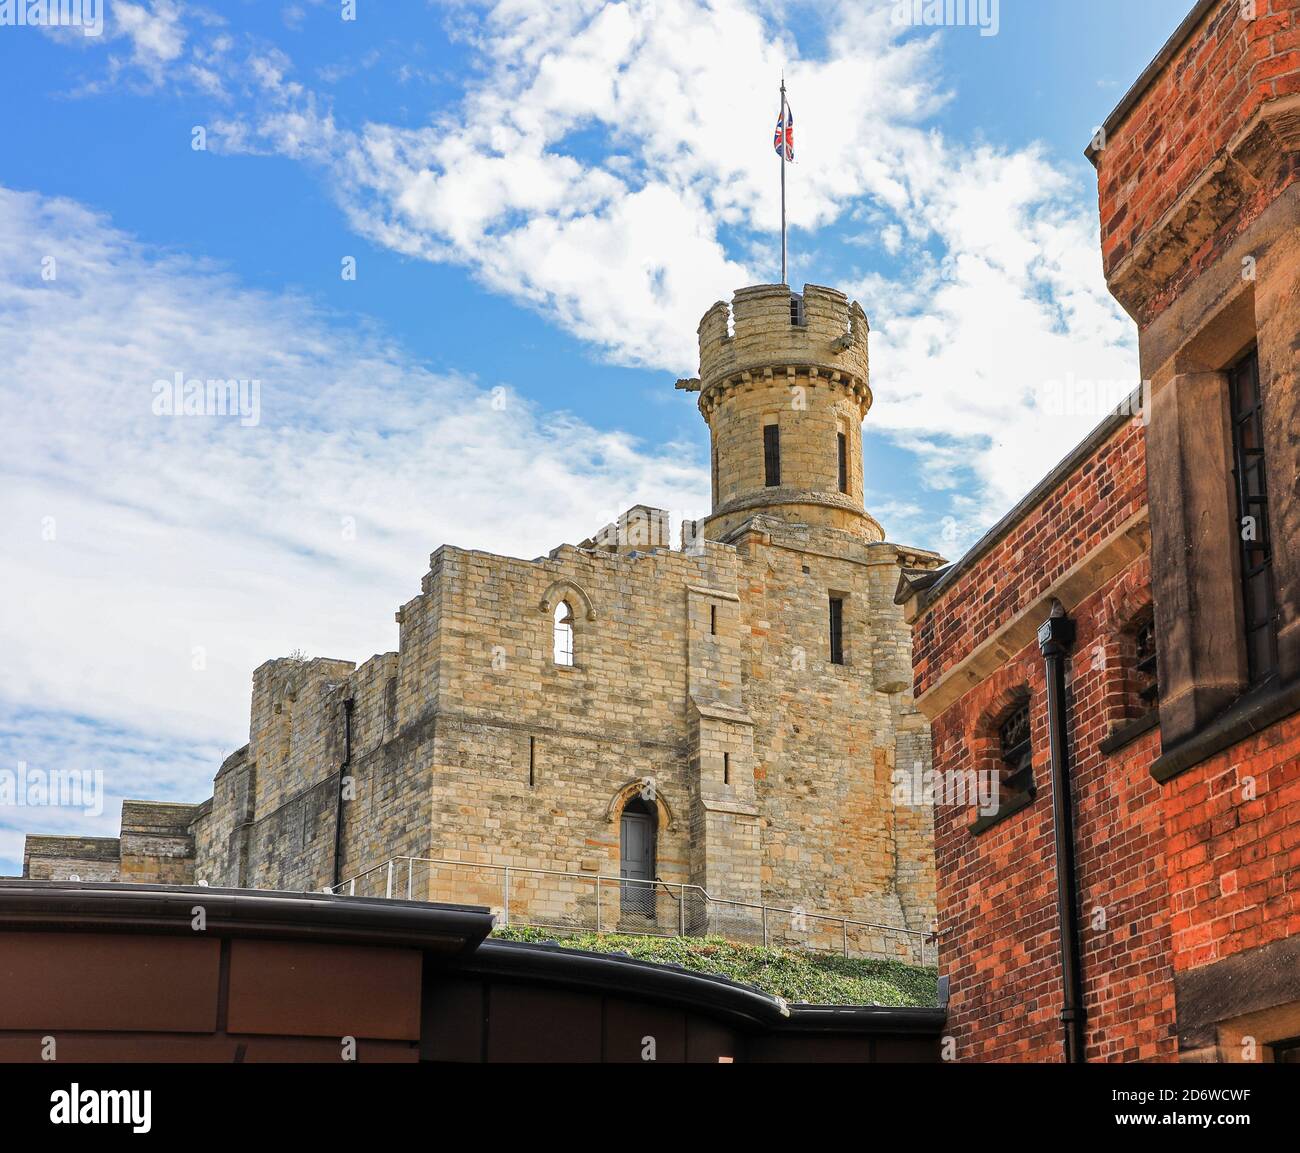 The Observatory Tower, Lincoln Castle, City of Lincoln, Lincolnshire, England, UK Stock Photo